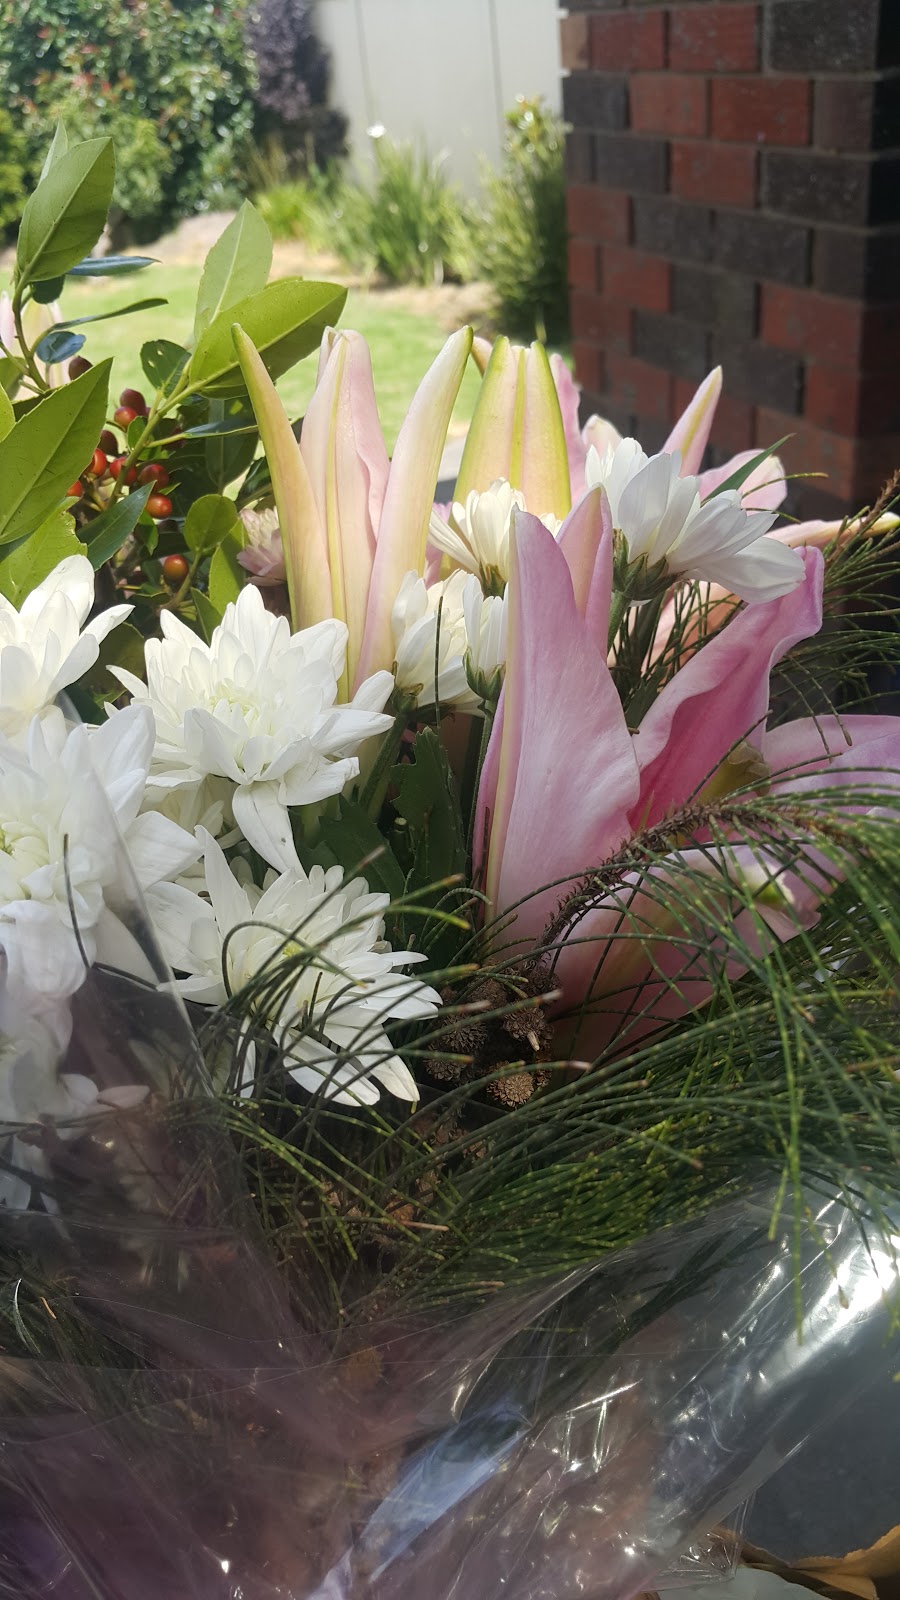 Angies For Flowers | florist | 78 Bickley Ave, Thomastown VIC 3074, Australia | 0421709437 OR +61 421 709 437